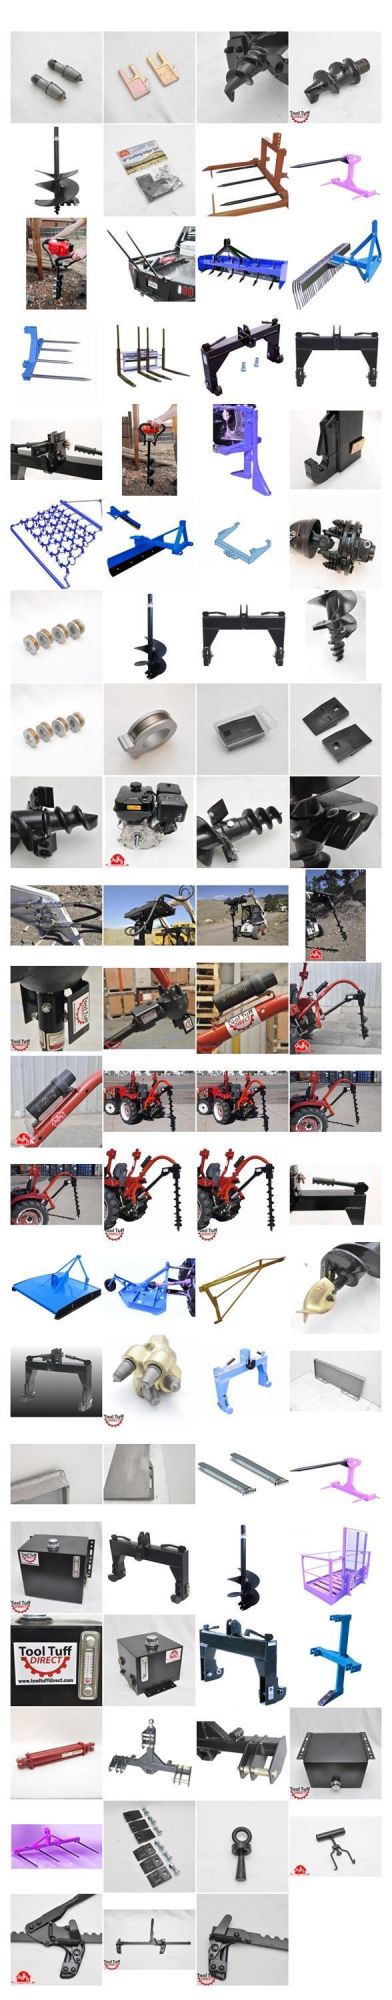 Agricultural Machinery Part for Plough Disc for Tractor Two Wheel Hand Tractor Plough Suitable for Mud